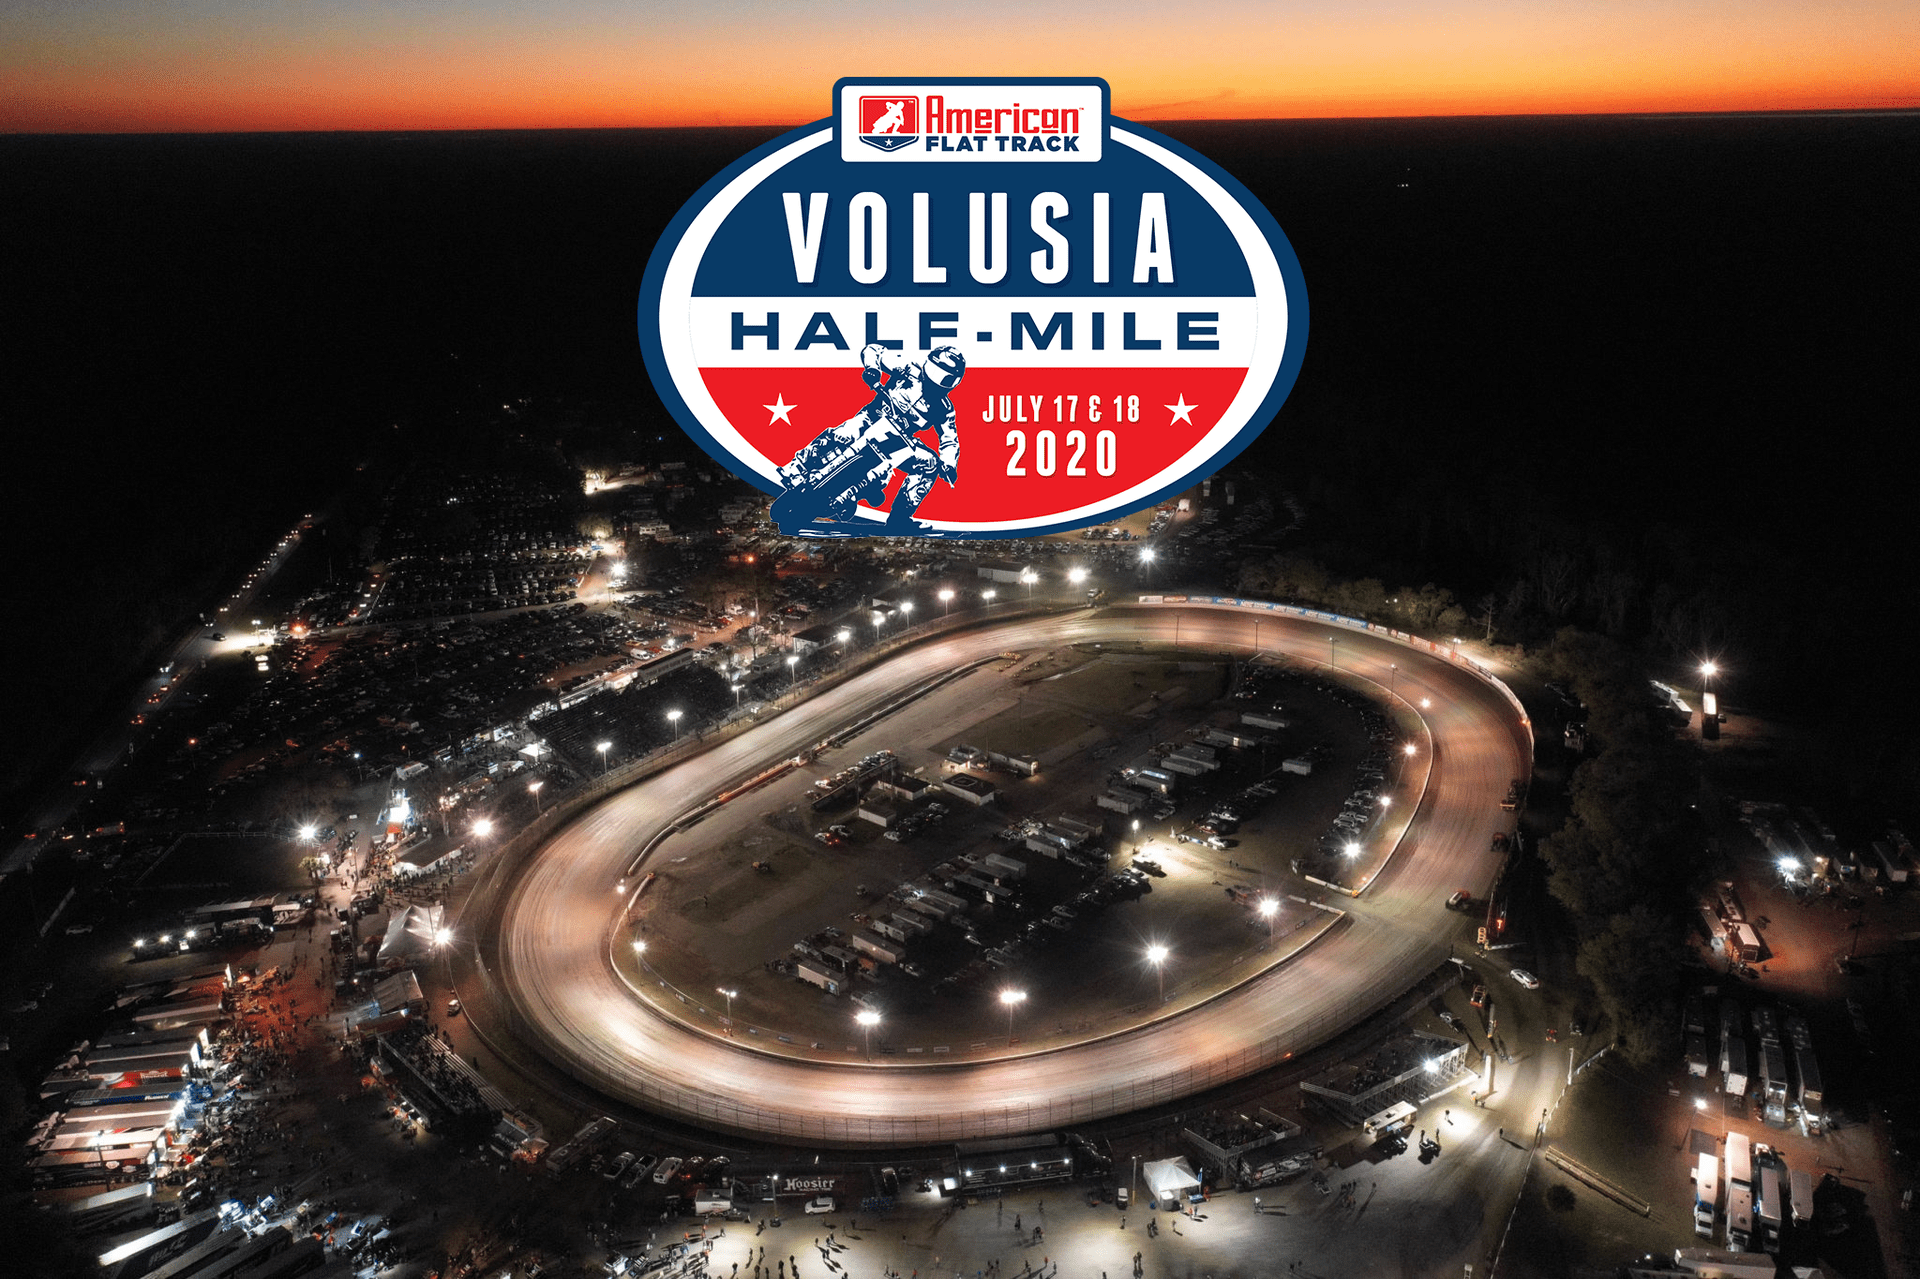 A limited number of tickets are on sale for the American Flat Track opener at Volusia Speedway Park.